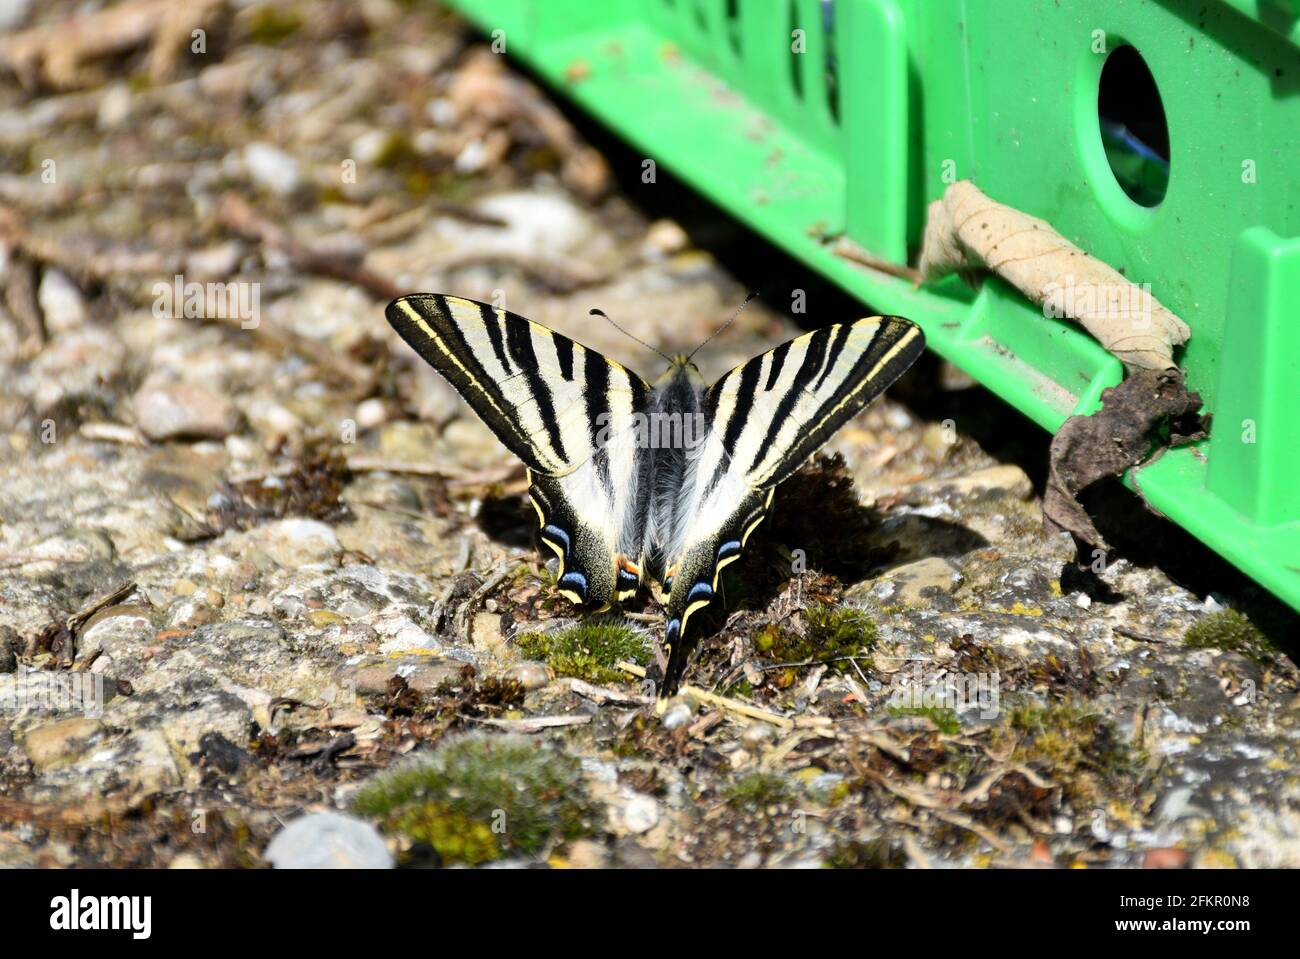 Butterfly Iphiclides Podalirius. It is a species of Lepidoptera ditrisio of the Papilionidae family widely distributed throughout the Palearctic regio Stock Photo